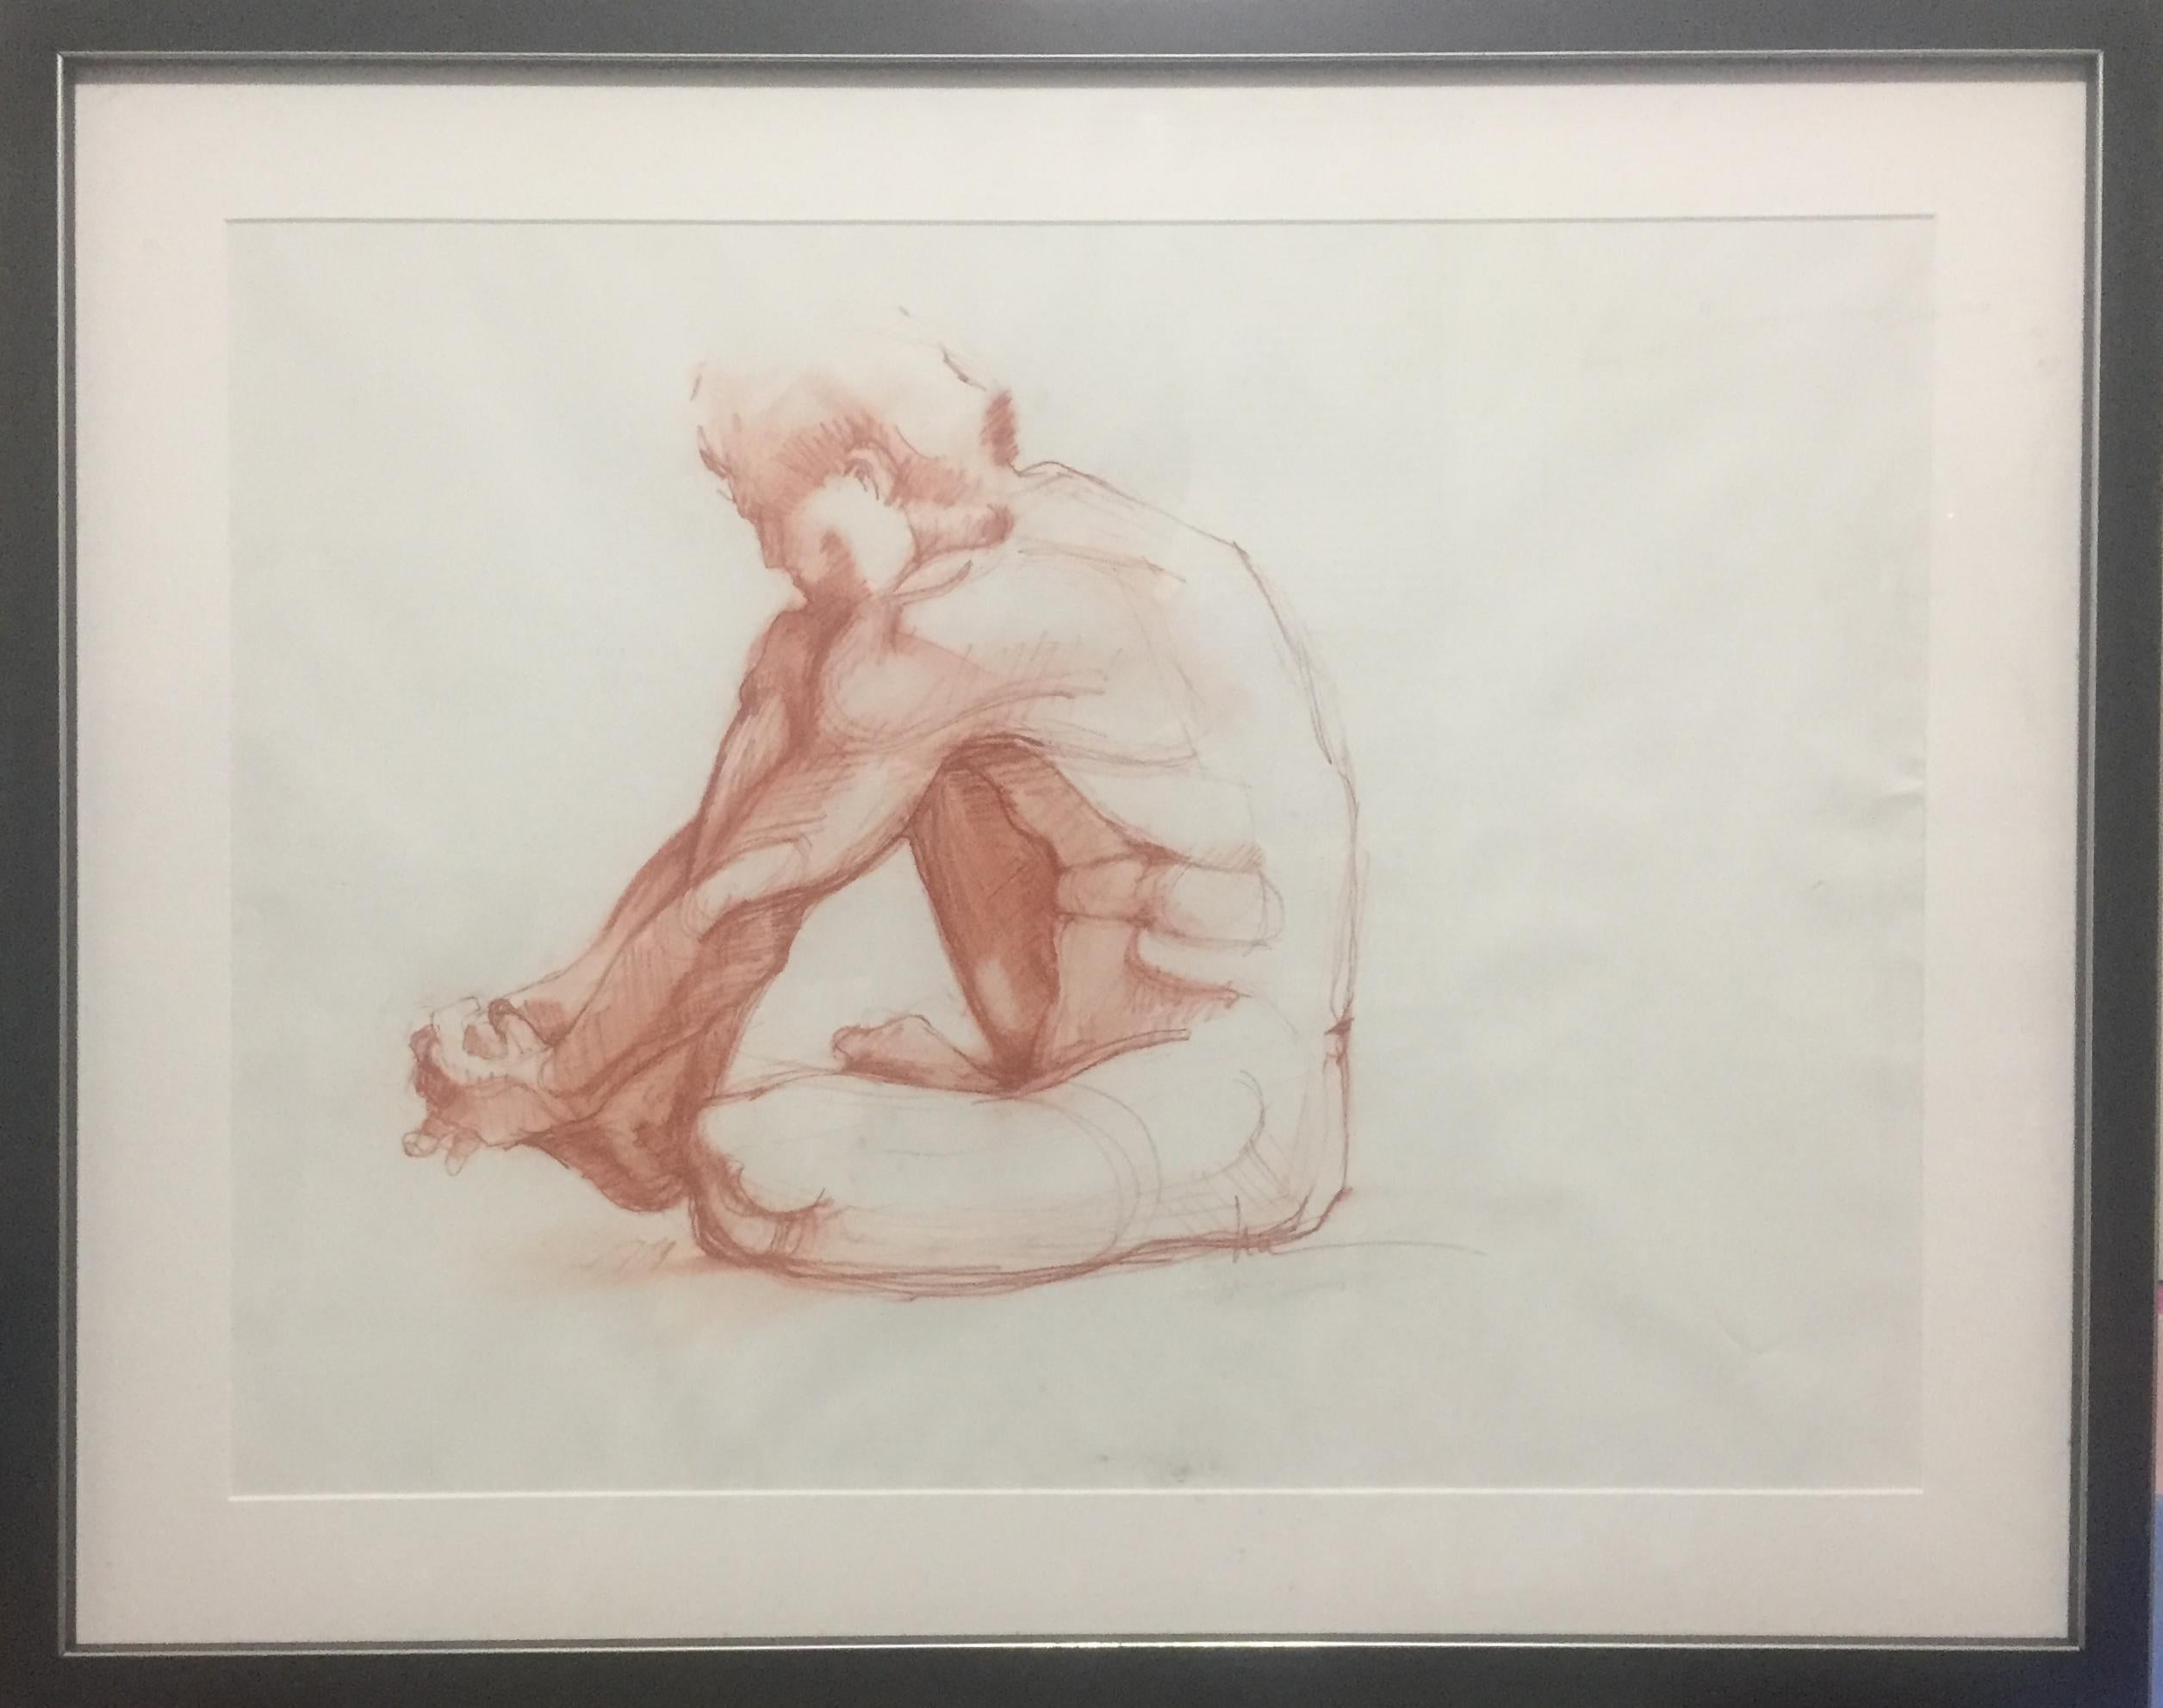 Seated Male Nude (Framed Contemporary Man Portrait Figure Drawing) - Art by Lue Isaac